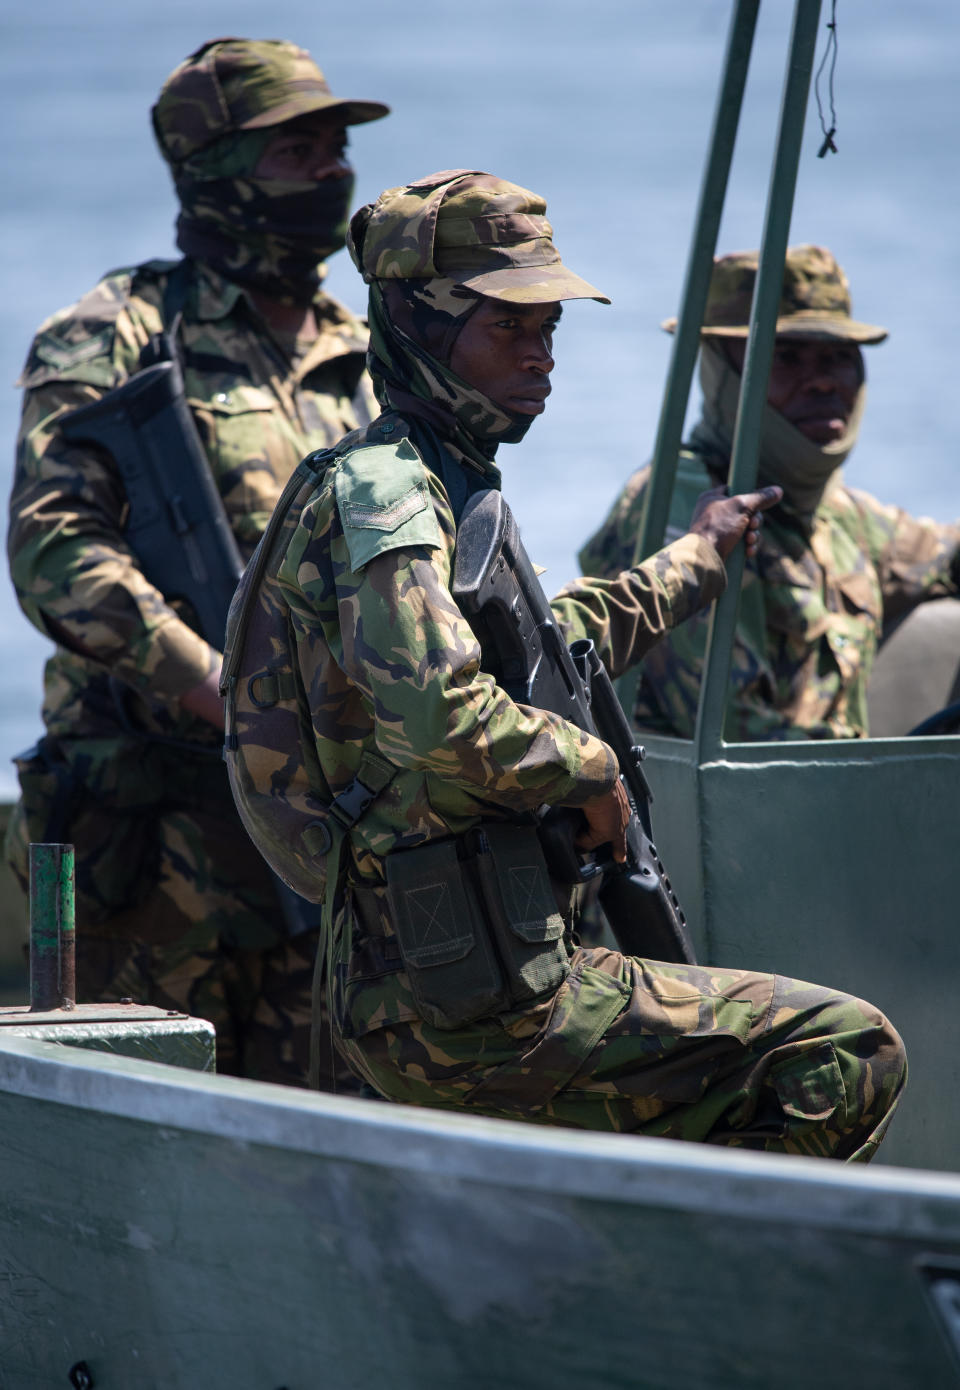 A Botswana Defence Force anti-poaching patrol, on the Chobe river in Kasane, Botswana, on day four of the royal tour of Africa.